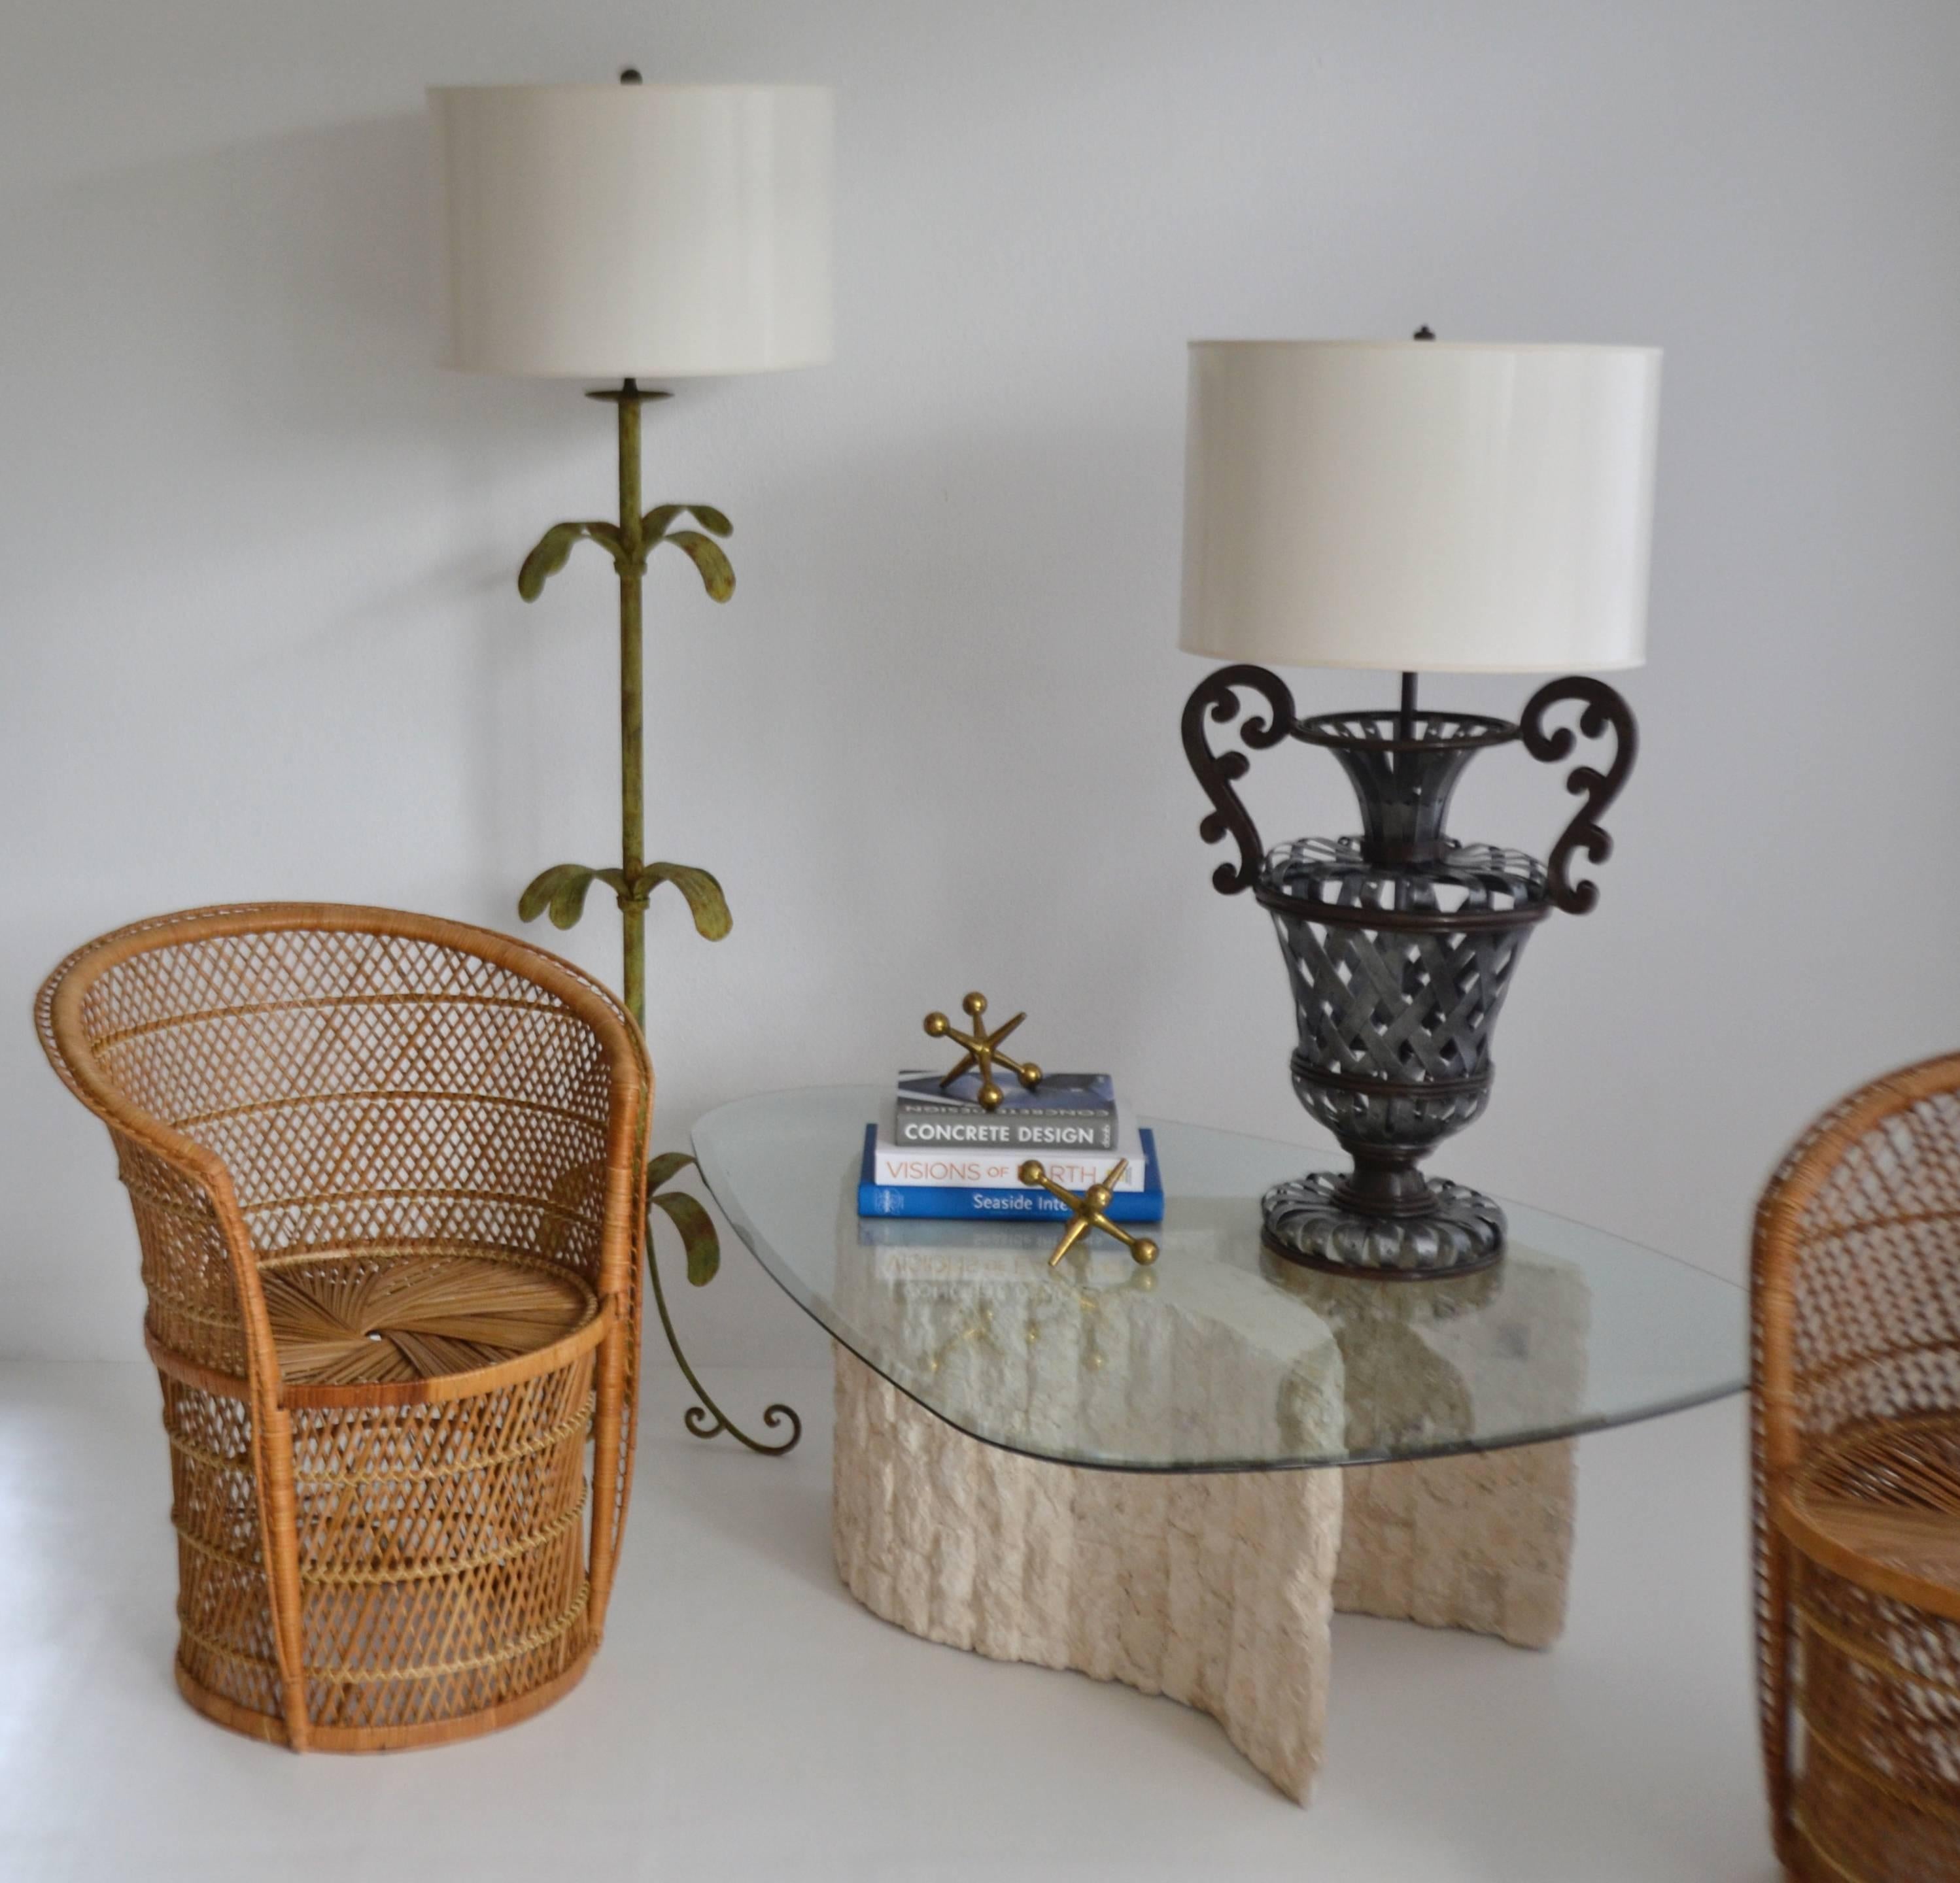 Glamourous pair of Hollywood Regency style wrought iron basket weave urn form table lamps, circa 1960s-1970s. These stunning artisan crafted hand-forged lamps are wired with brass fittings.
Shades not included.
Measurements: 
Overall: 39.5